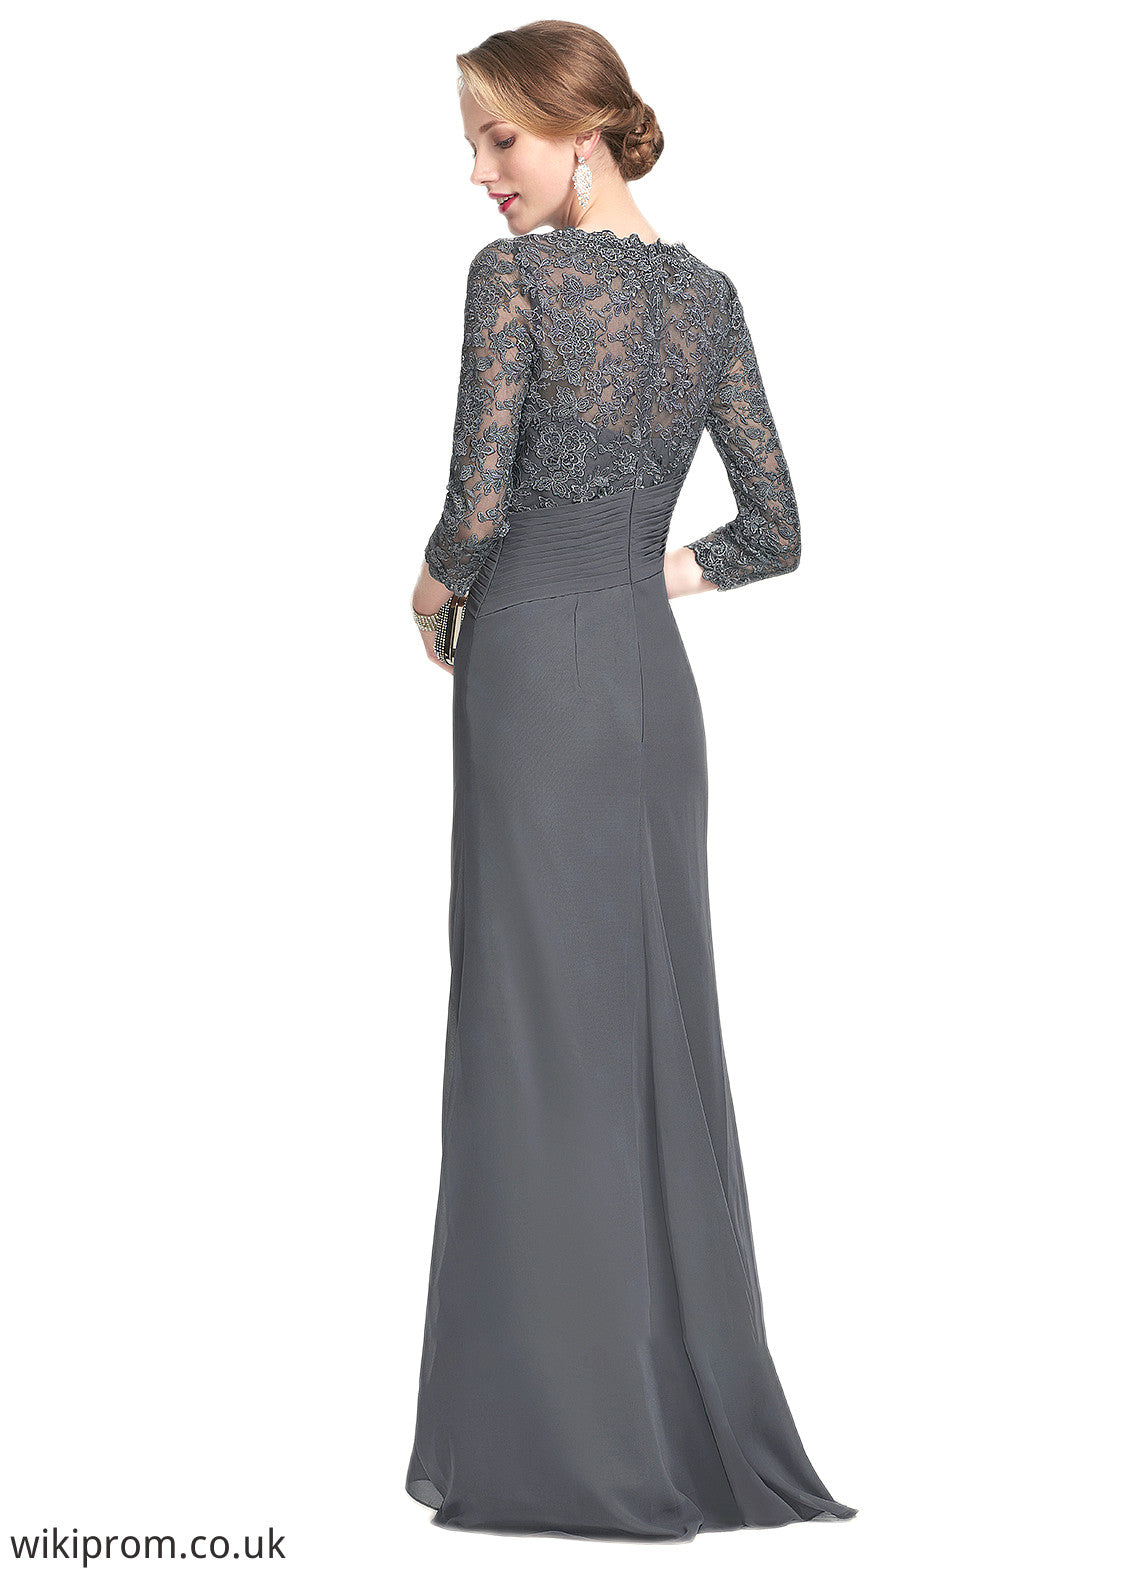 Florence Sheath/Column Scoop Neck Floor-Length Chiffon Lace Mother of the Bride Dress With Ruffle SWK126P0014611